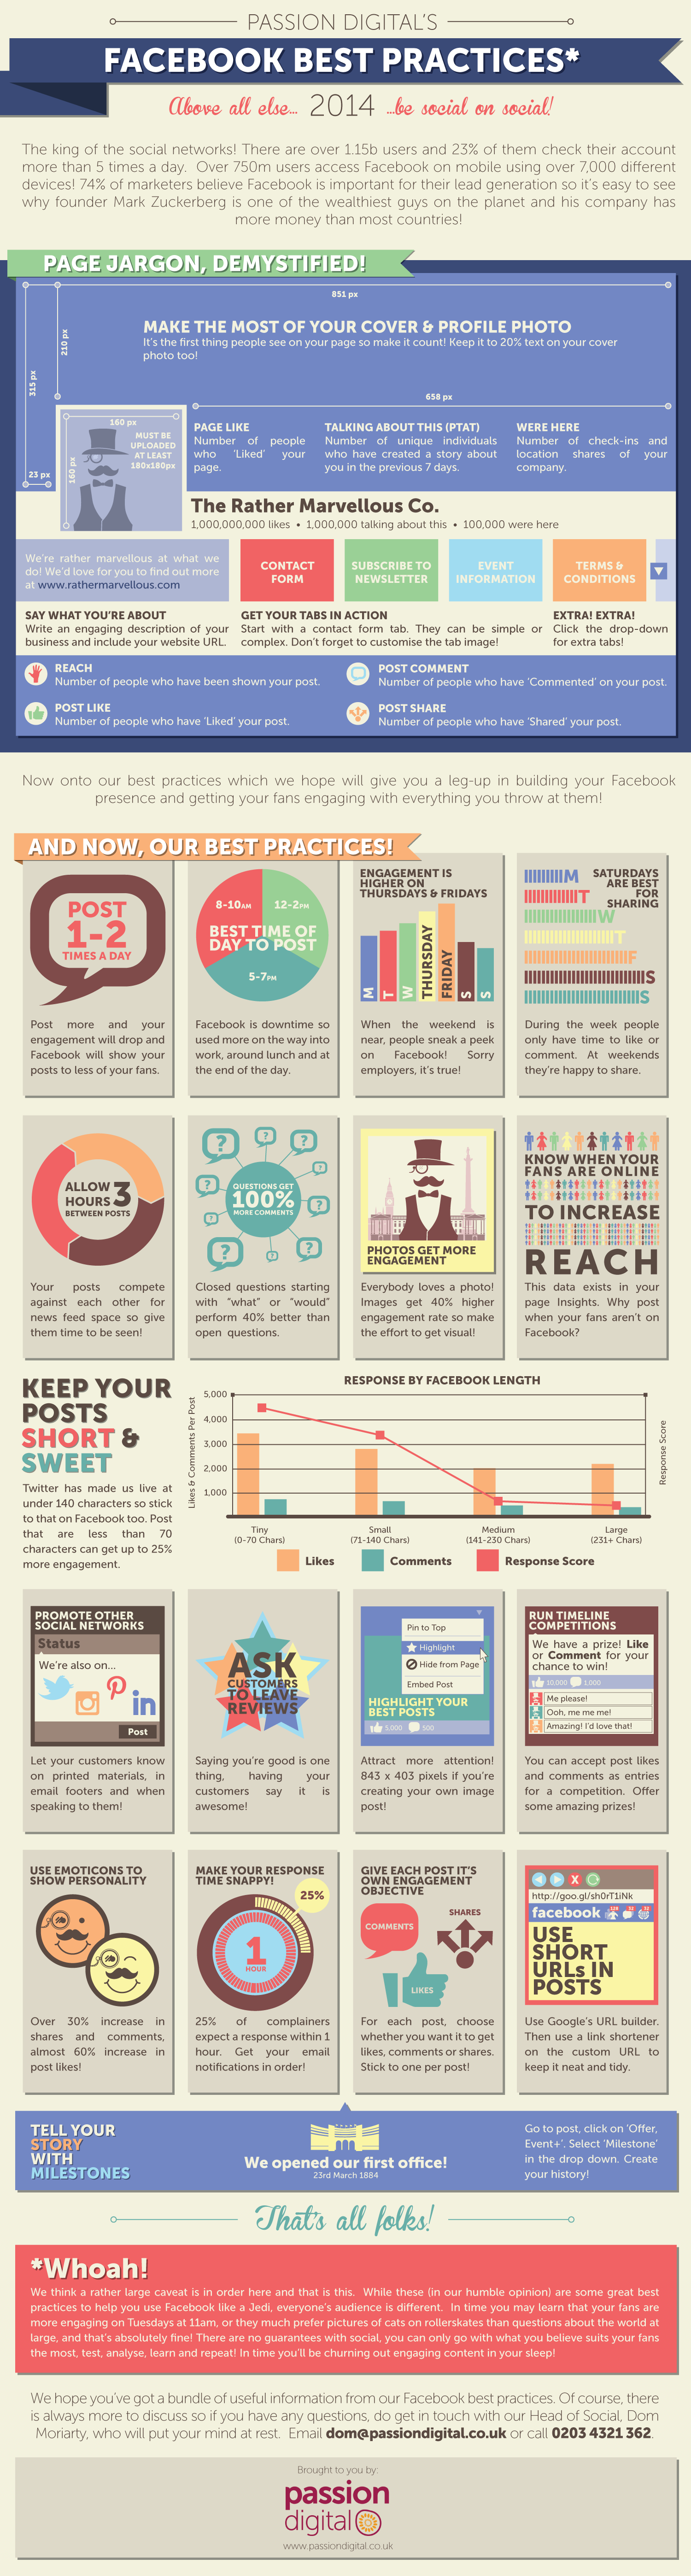 23 Facebook Optimization Tips for 2014 [INFOGRAPHIC]